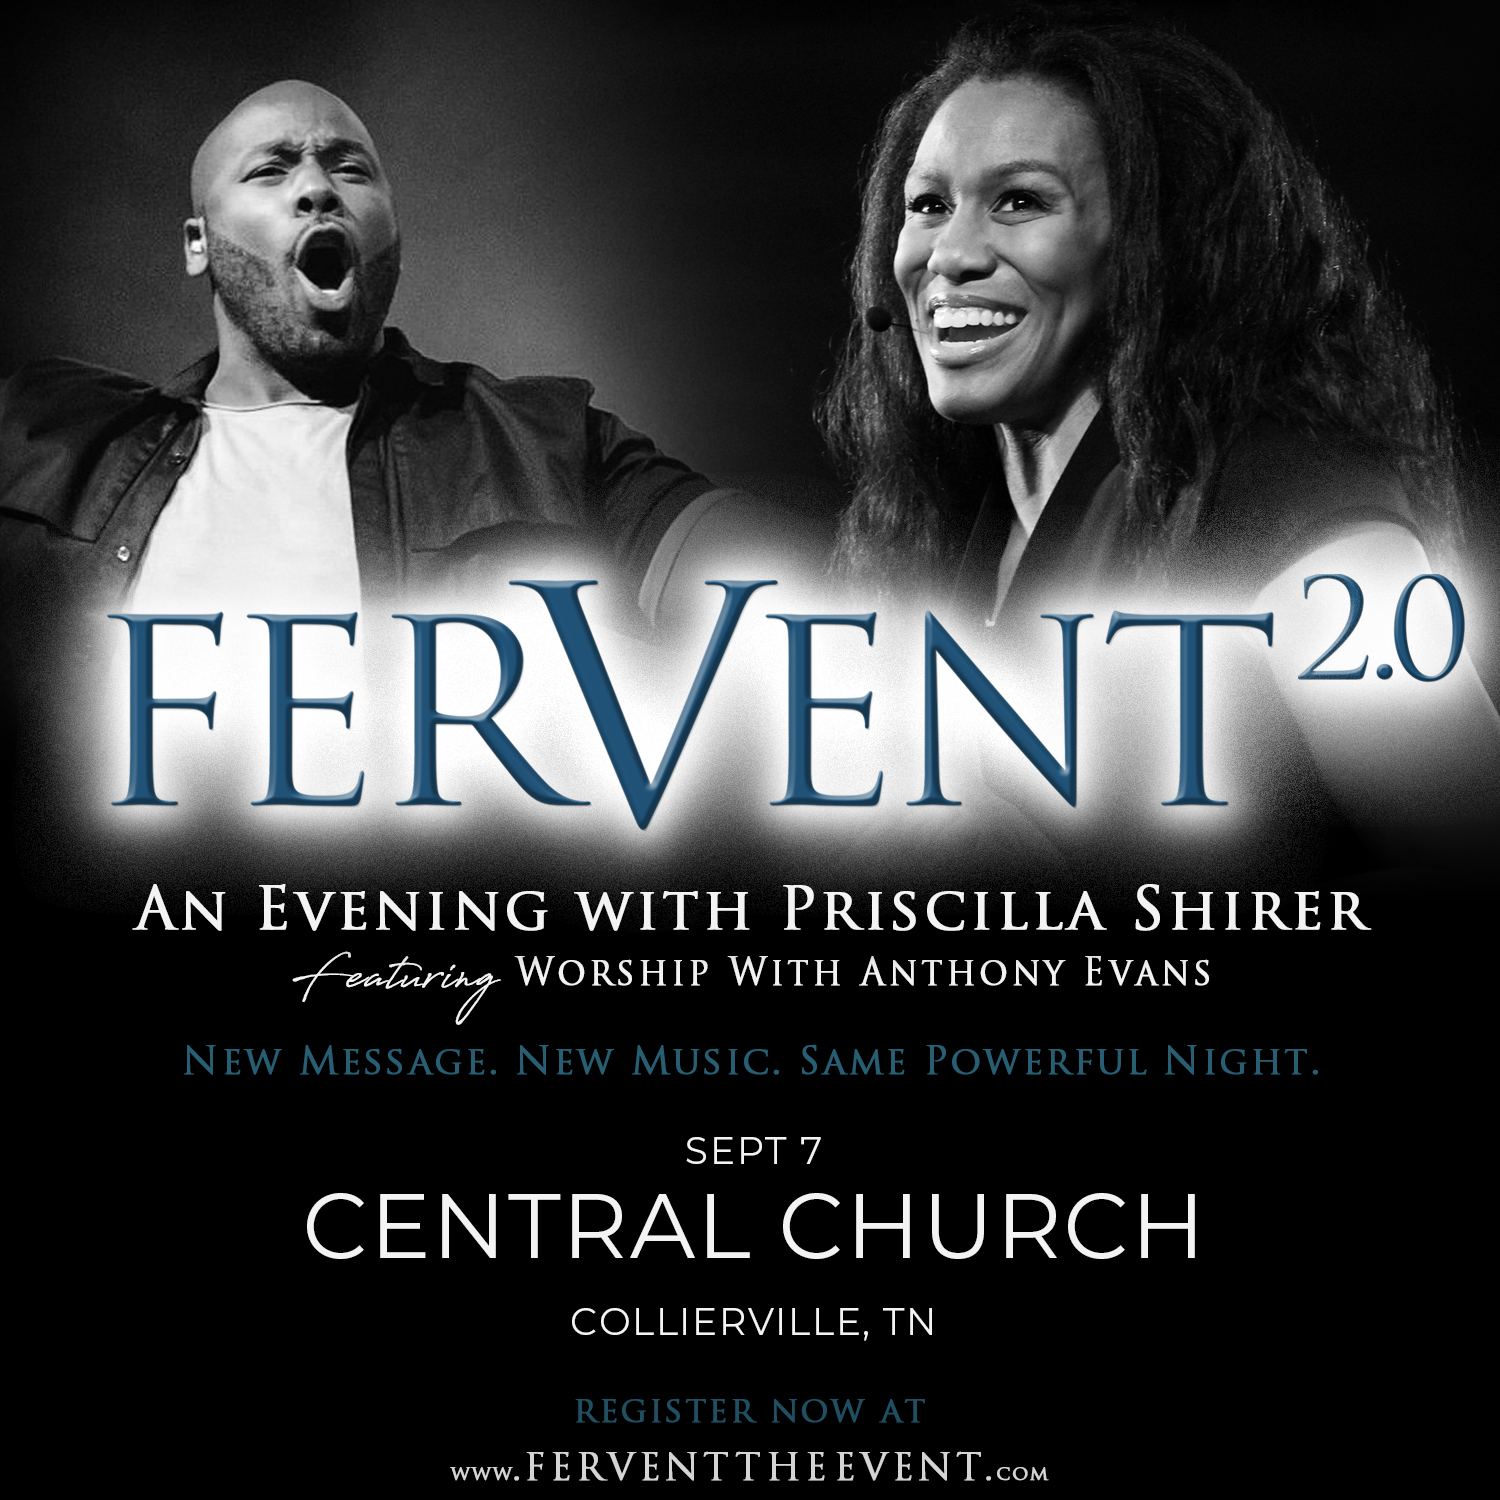 Unpacking The Fervent Event With Priscilla Shirer Heartfelt Ministries